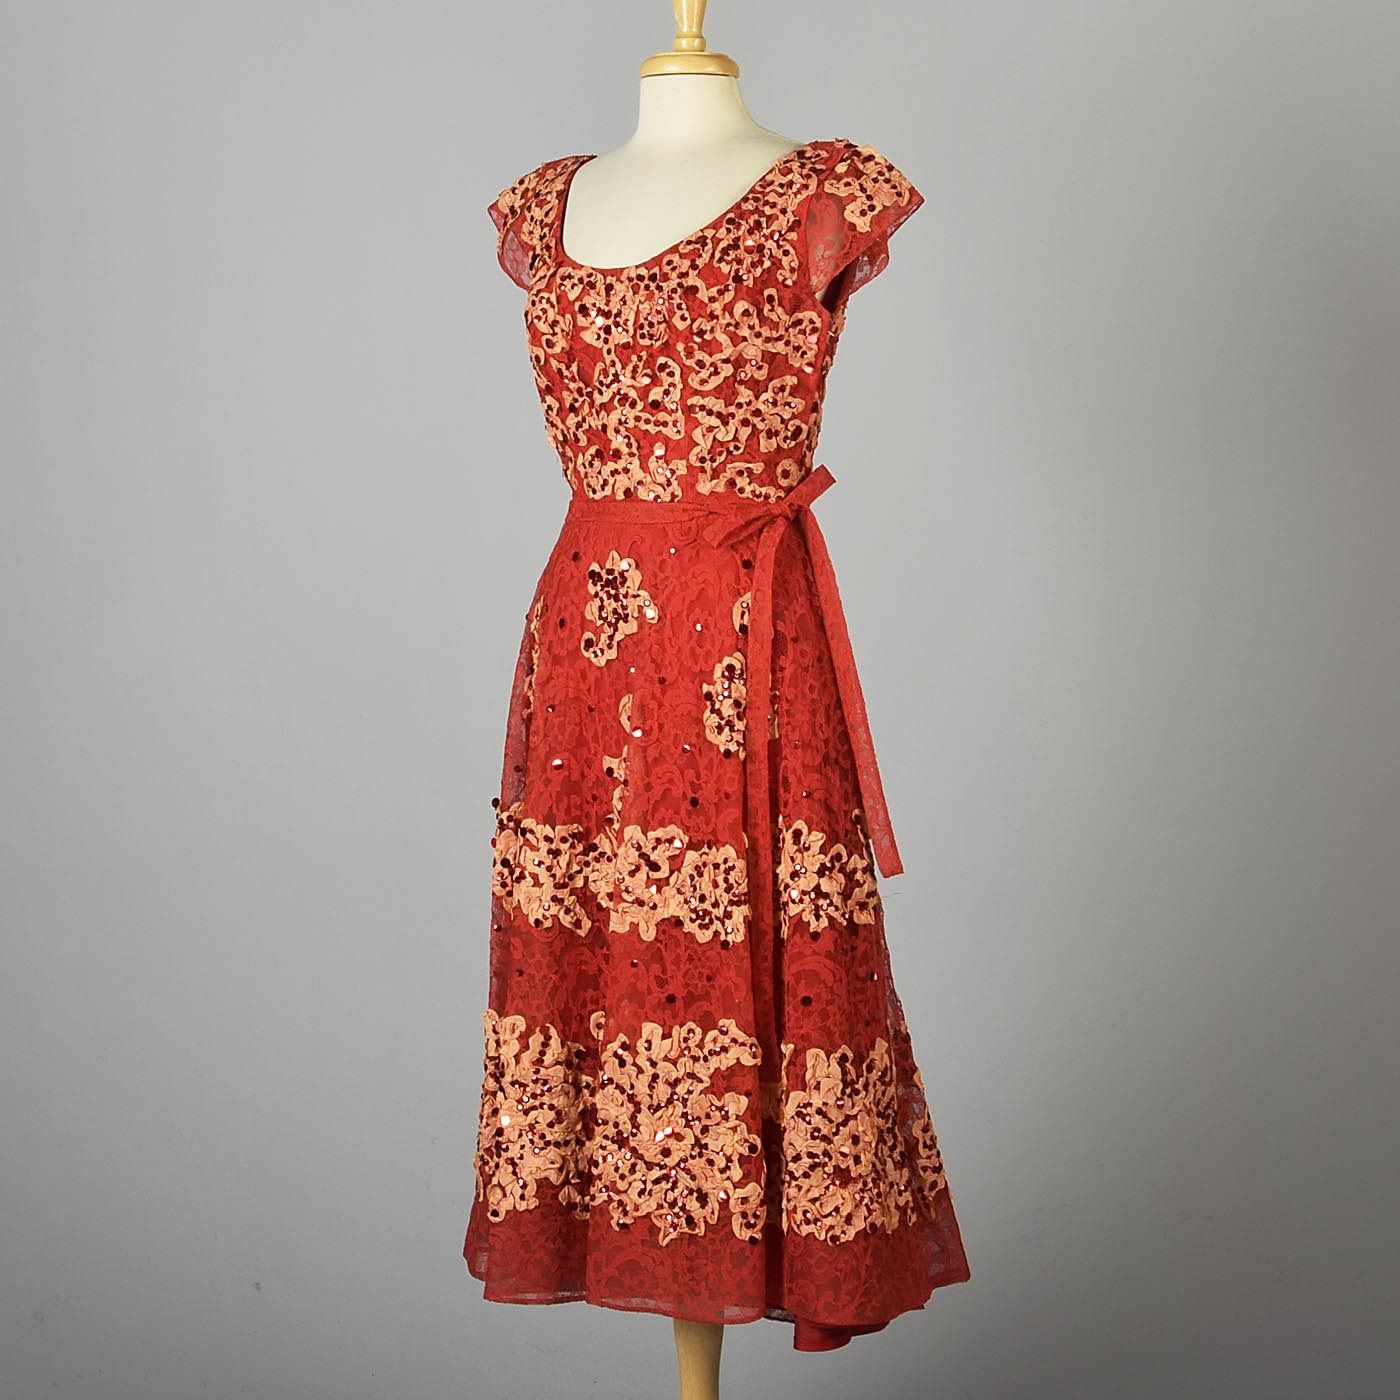 1940s Red Lace Fit & Flare Party Dress by Patric of Miss America